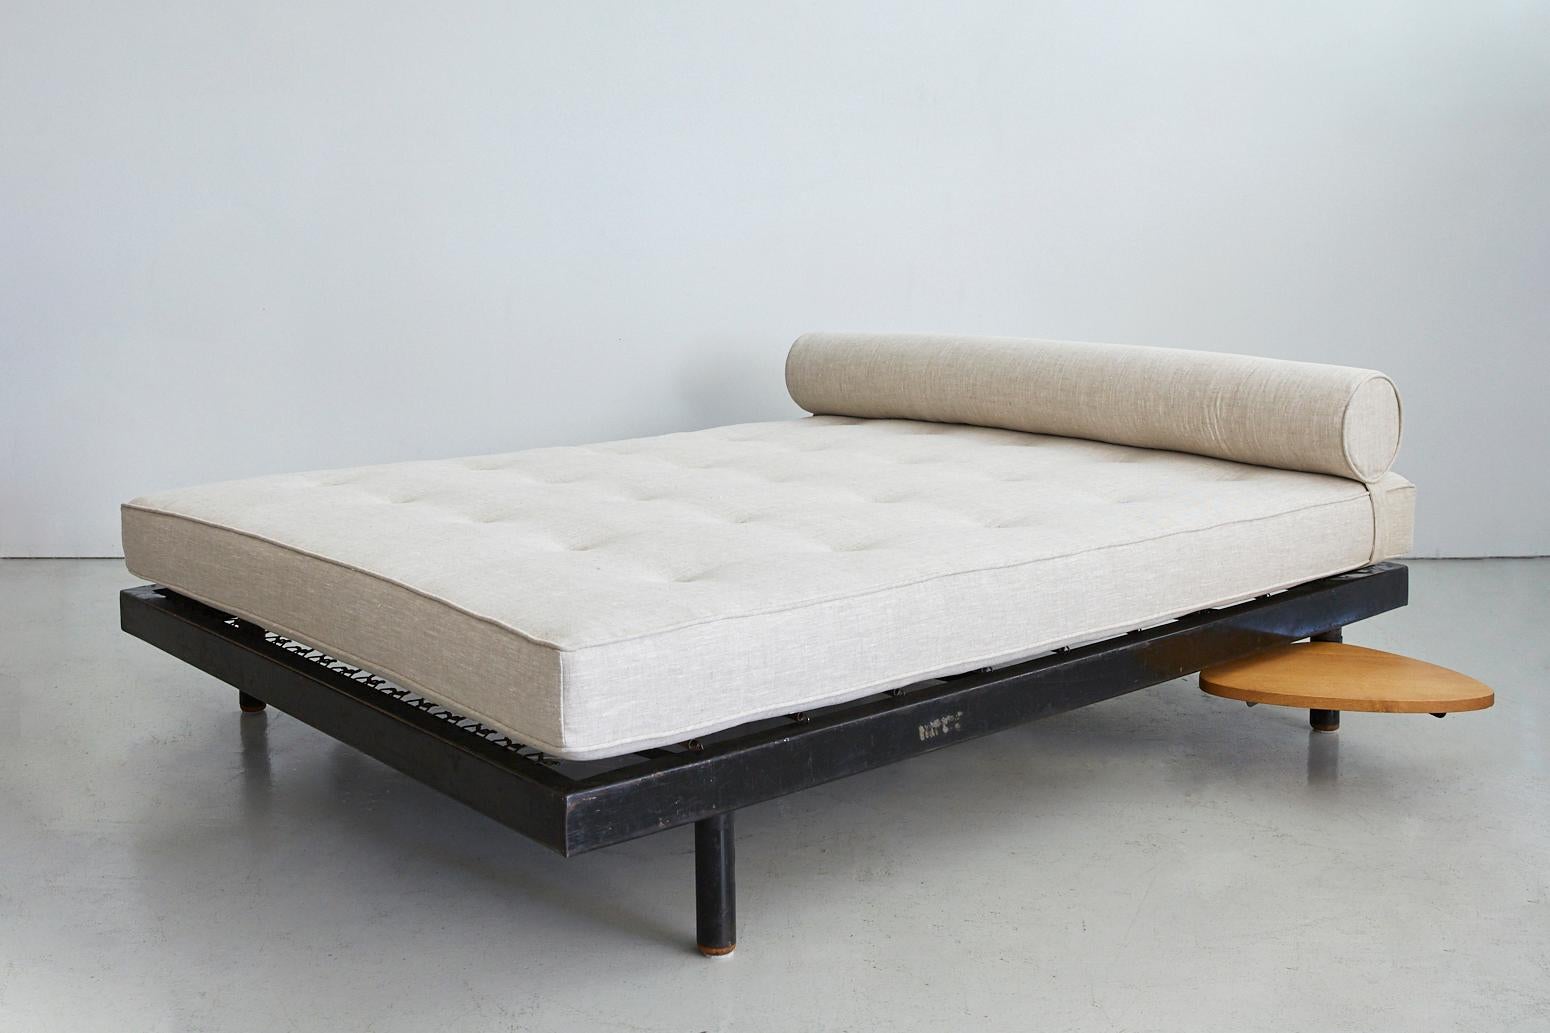 Rare and stunning S.C.A.L. Antony double daybed with pivoting oak side tables designed by Jean Prouvé and Charlotte Perriand. Newly upholstered in slubby greige linen. Manufactured by Ateliers Prouvé, France, circa 1951.